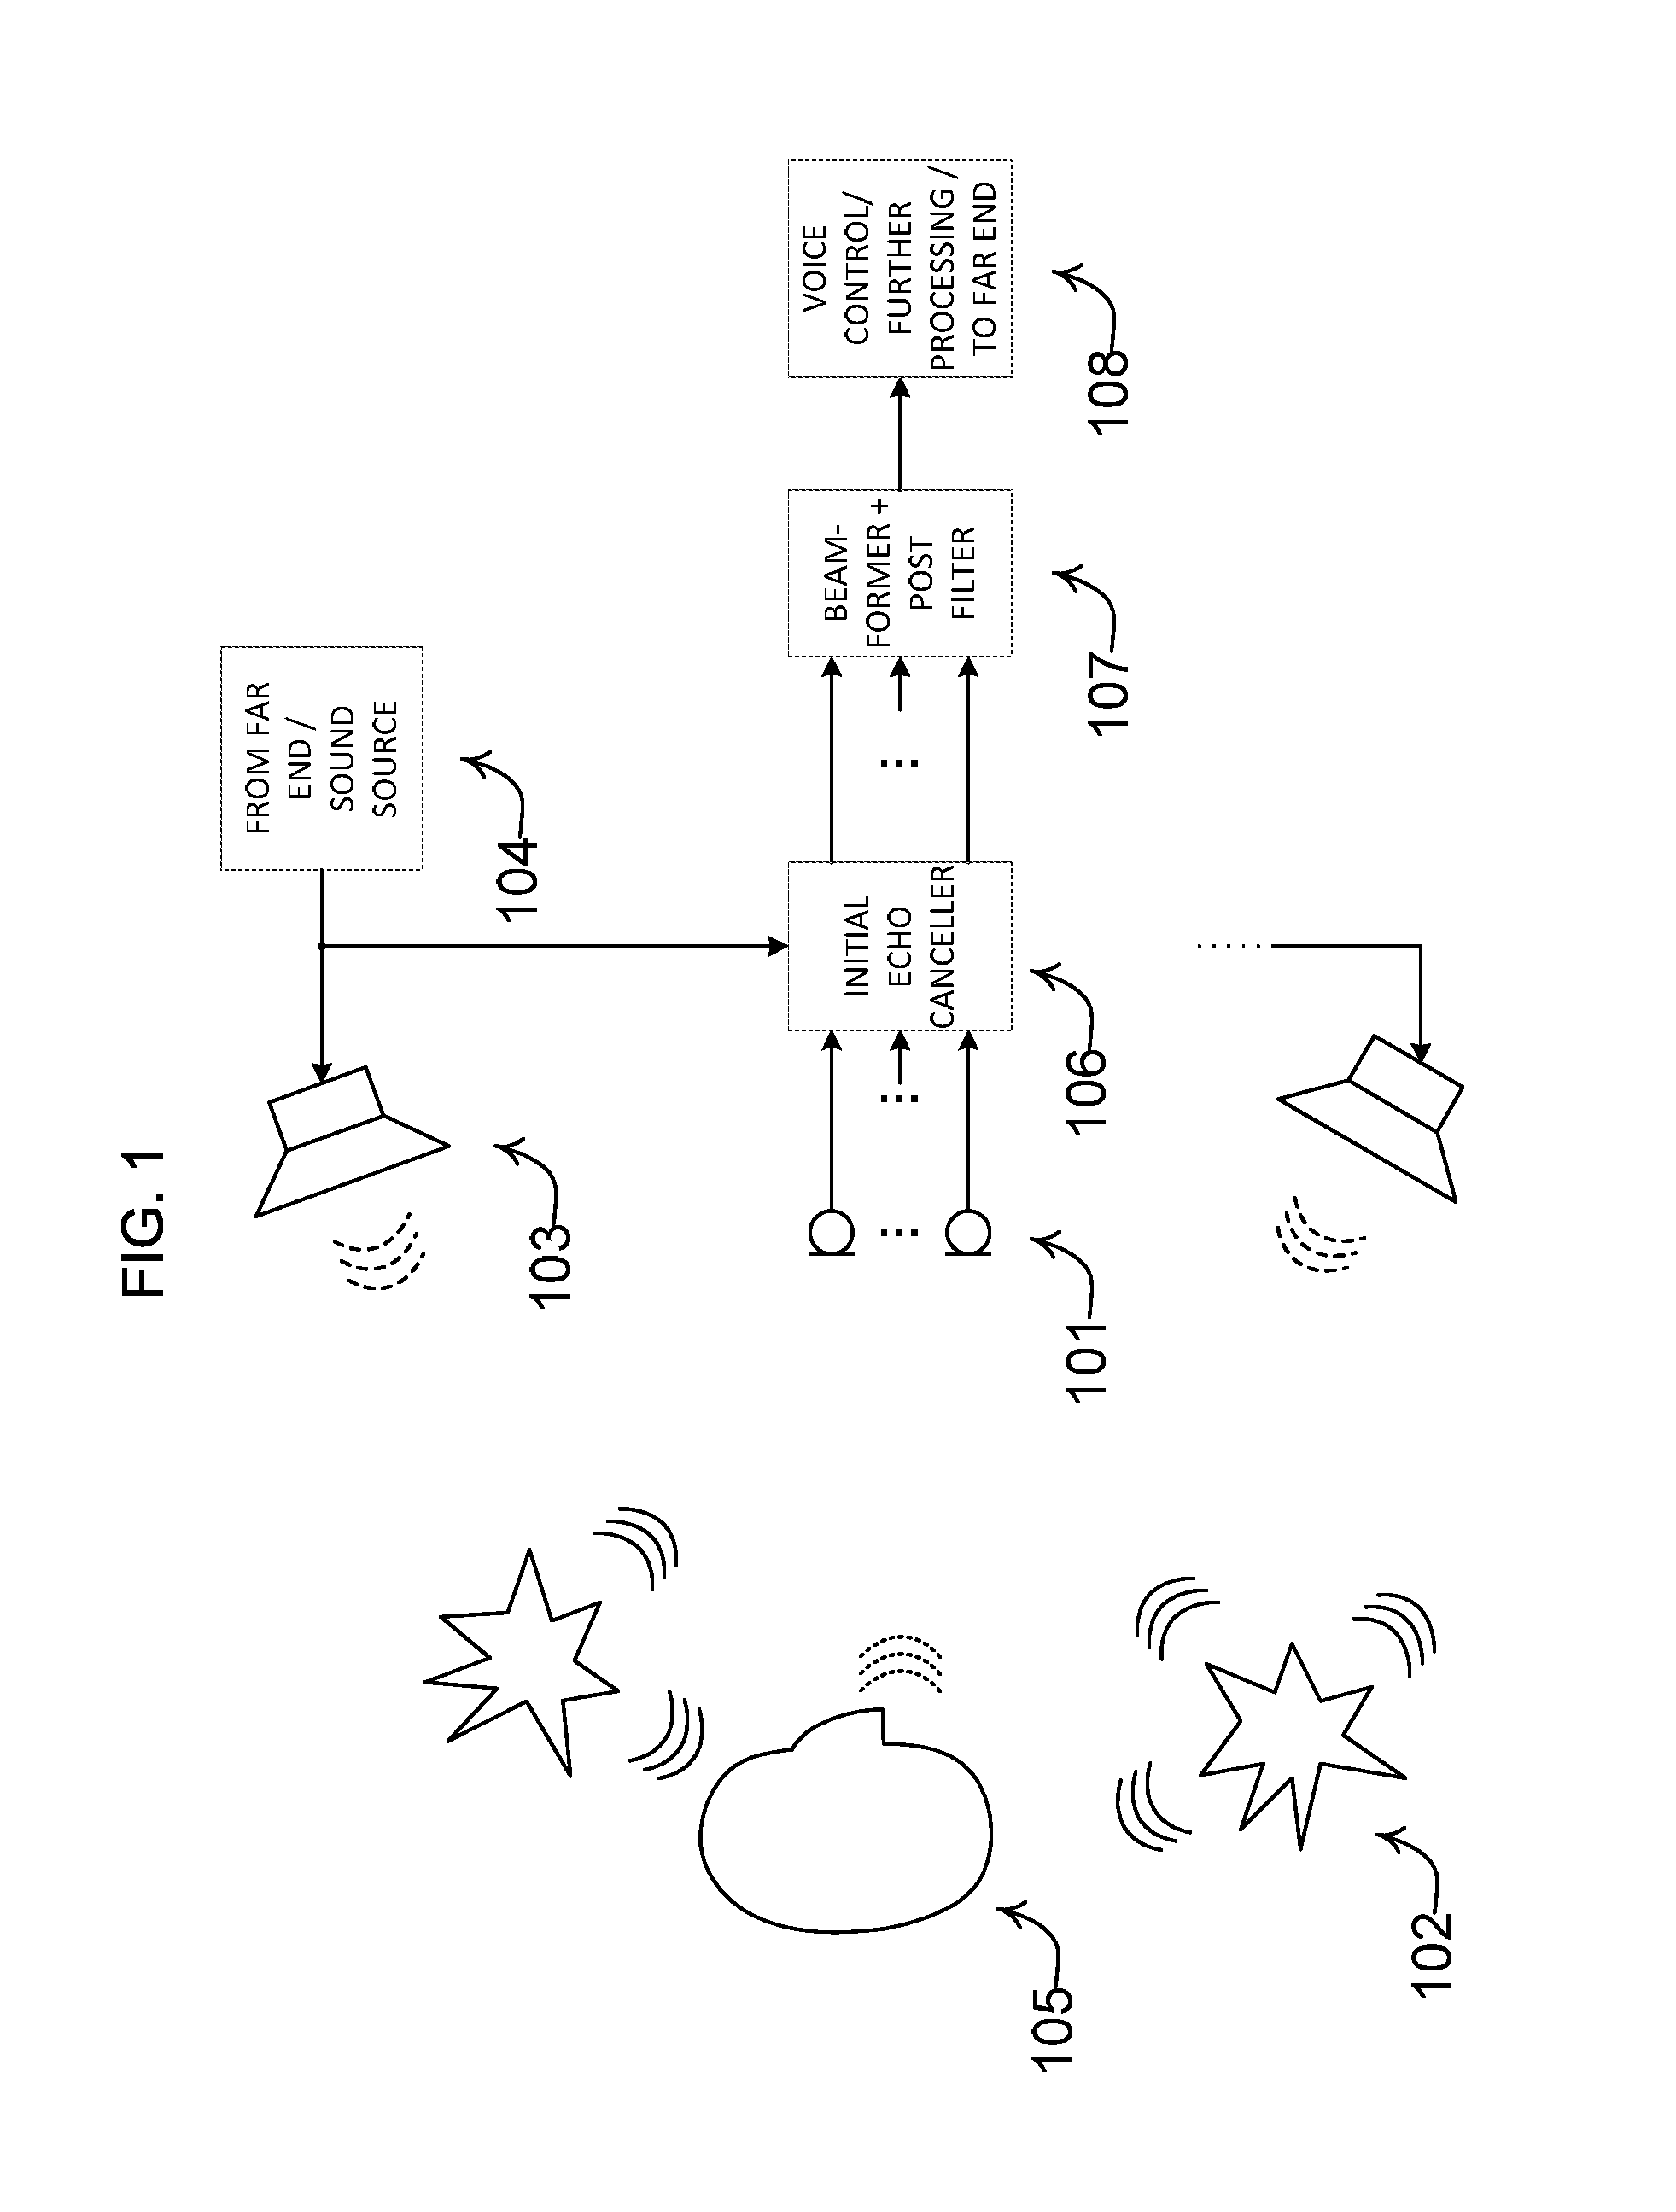 Noise estimation for use with noise reduction and echo cancellation in personal communication